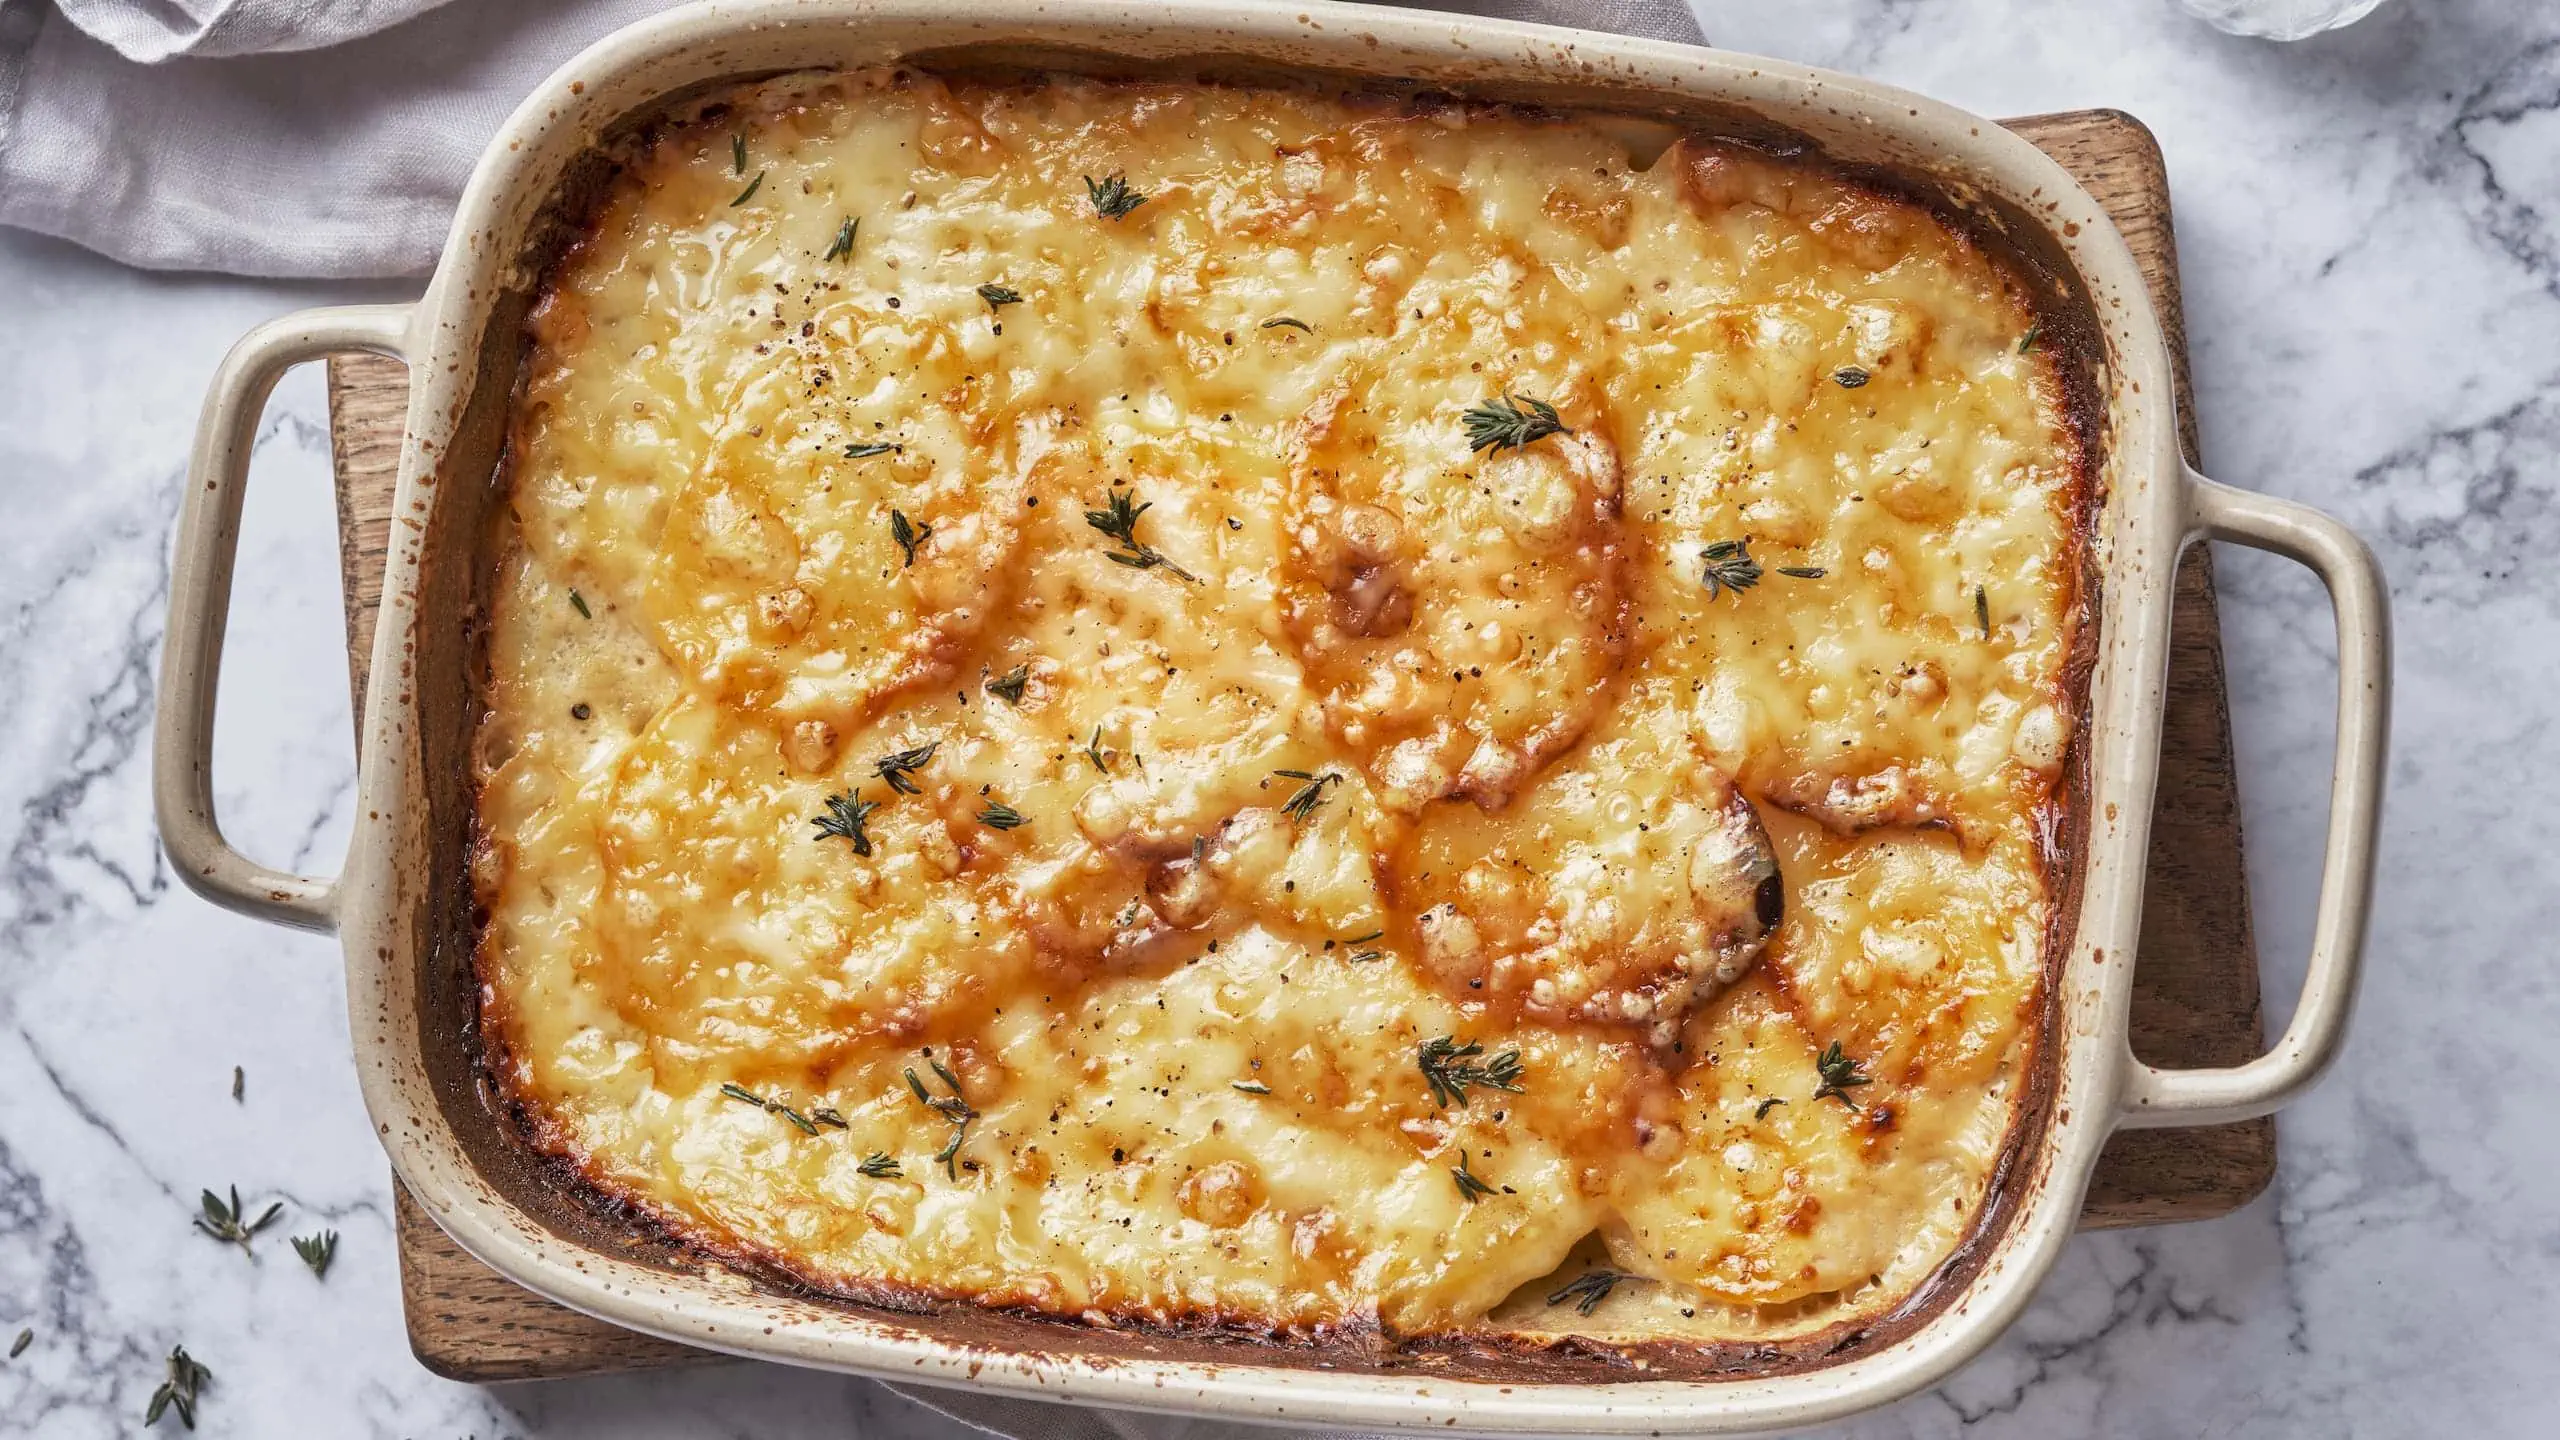 Our version of Red Lobster's chicken cobbler recipe